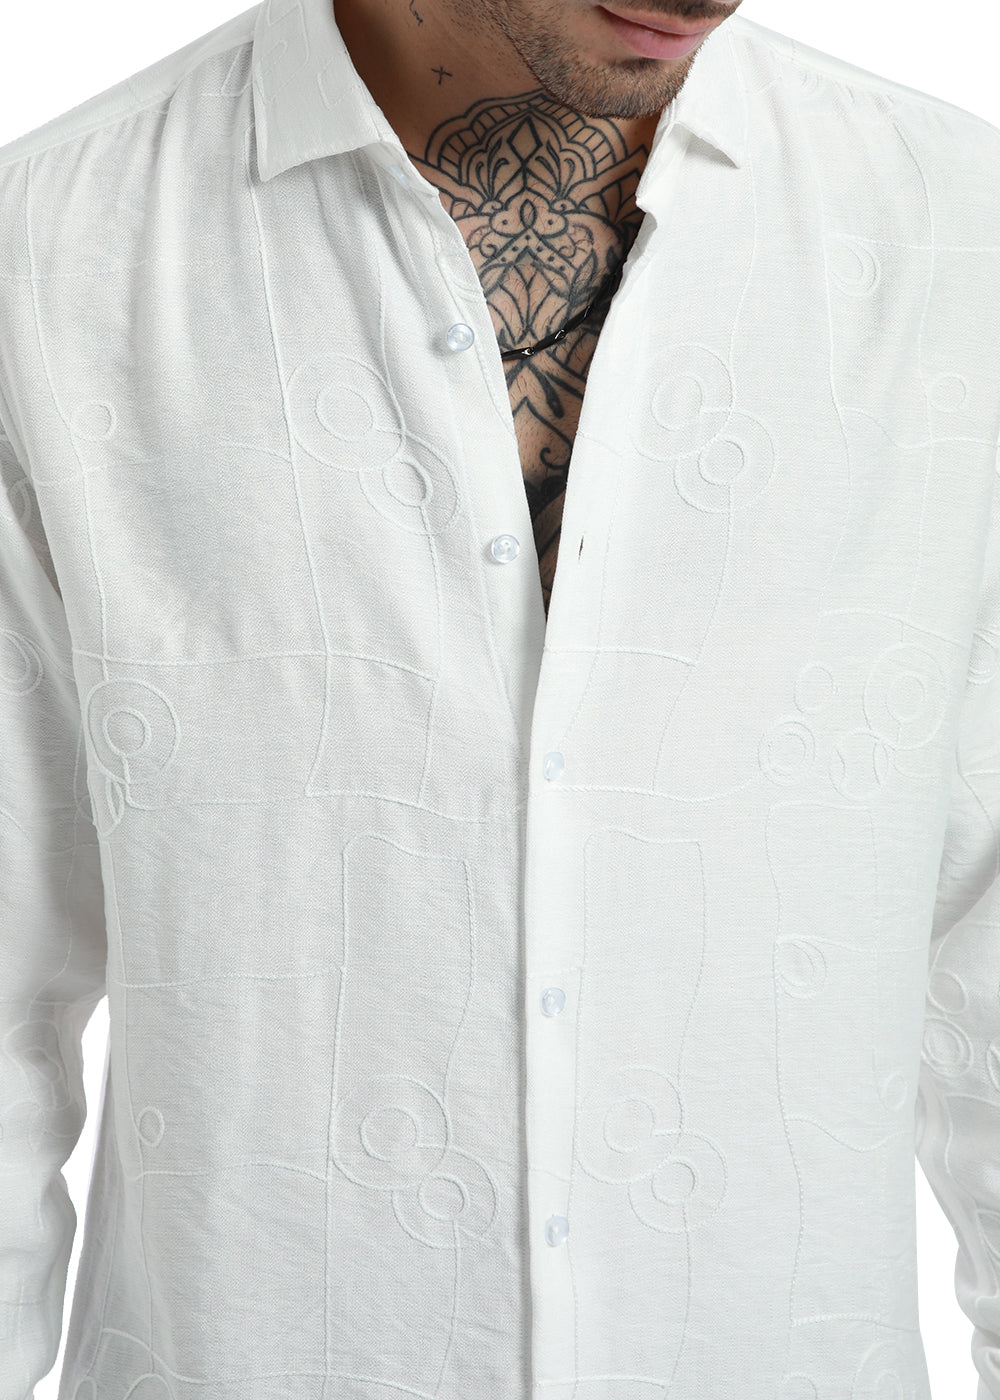 Opal White Abstract Embroidery Shirt